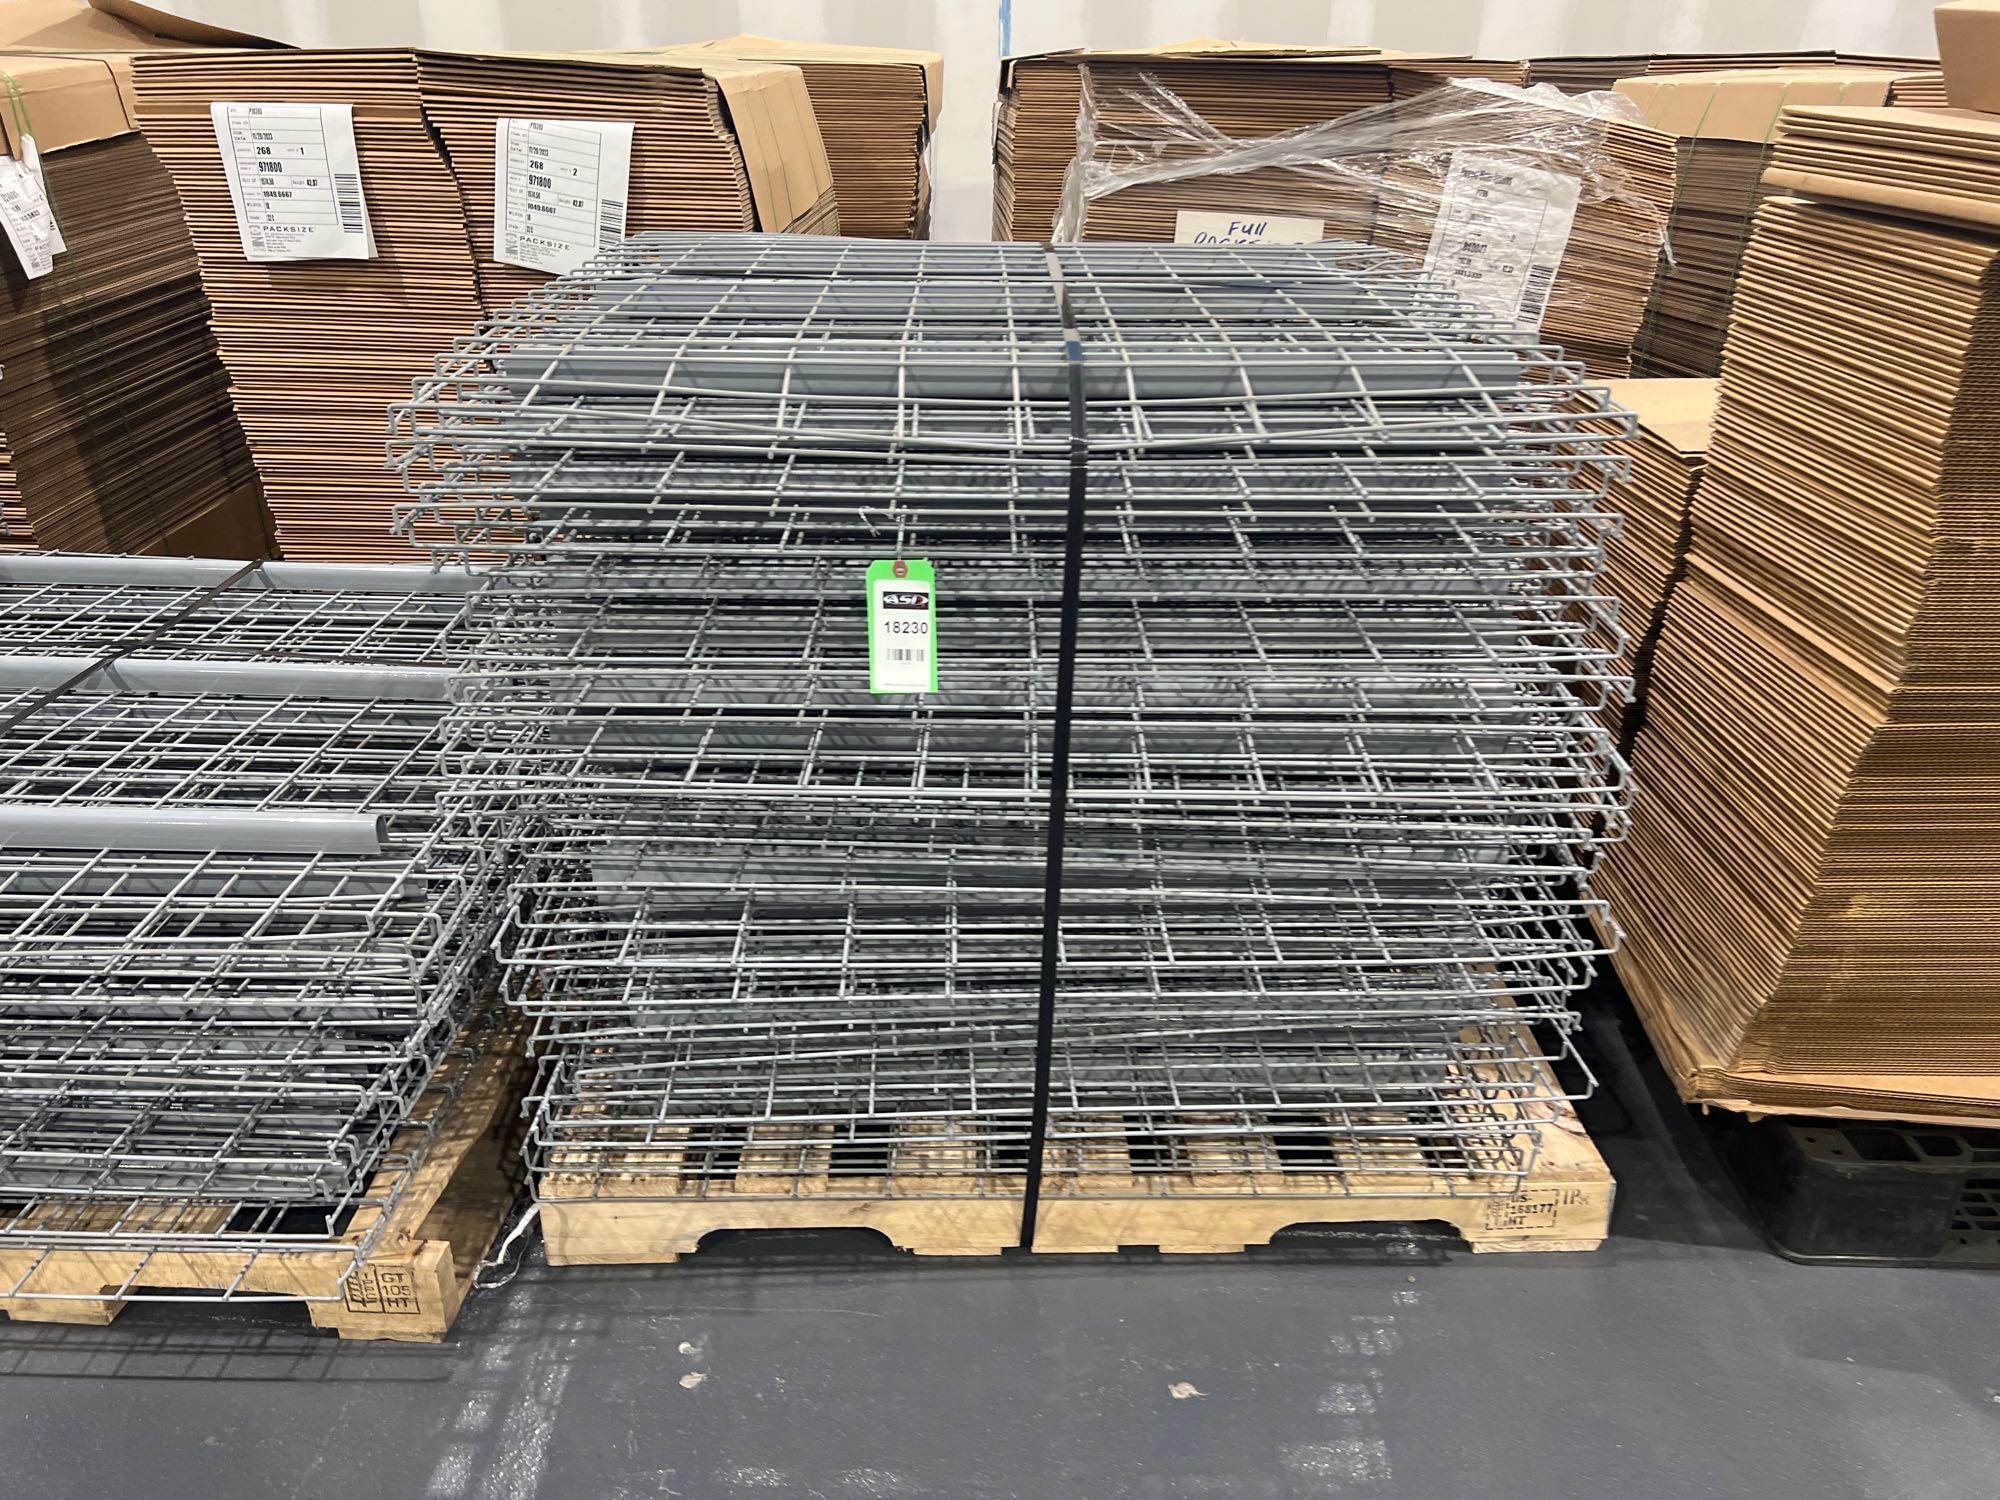 PALLET OF APPROX. 35 WIRE GRATES FOR PALLET RACKING, APPROX. DIMENSIONS 43" X 45"